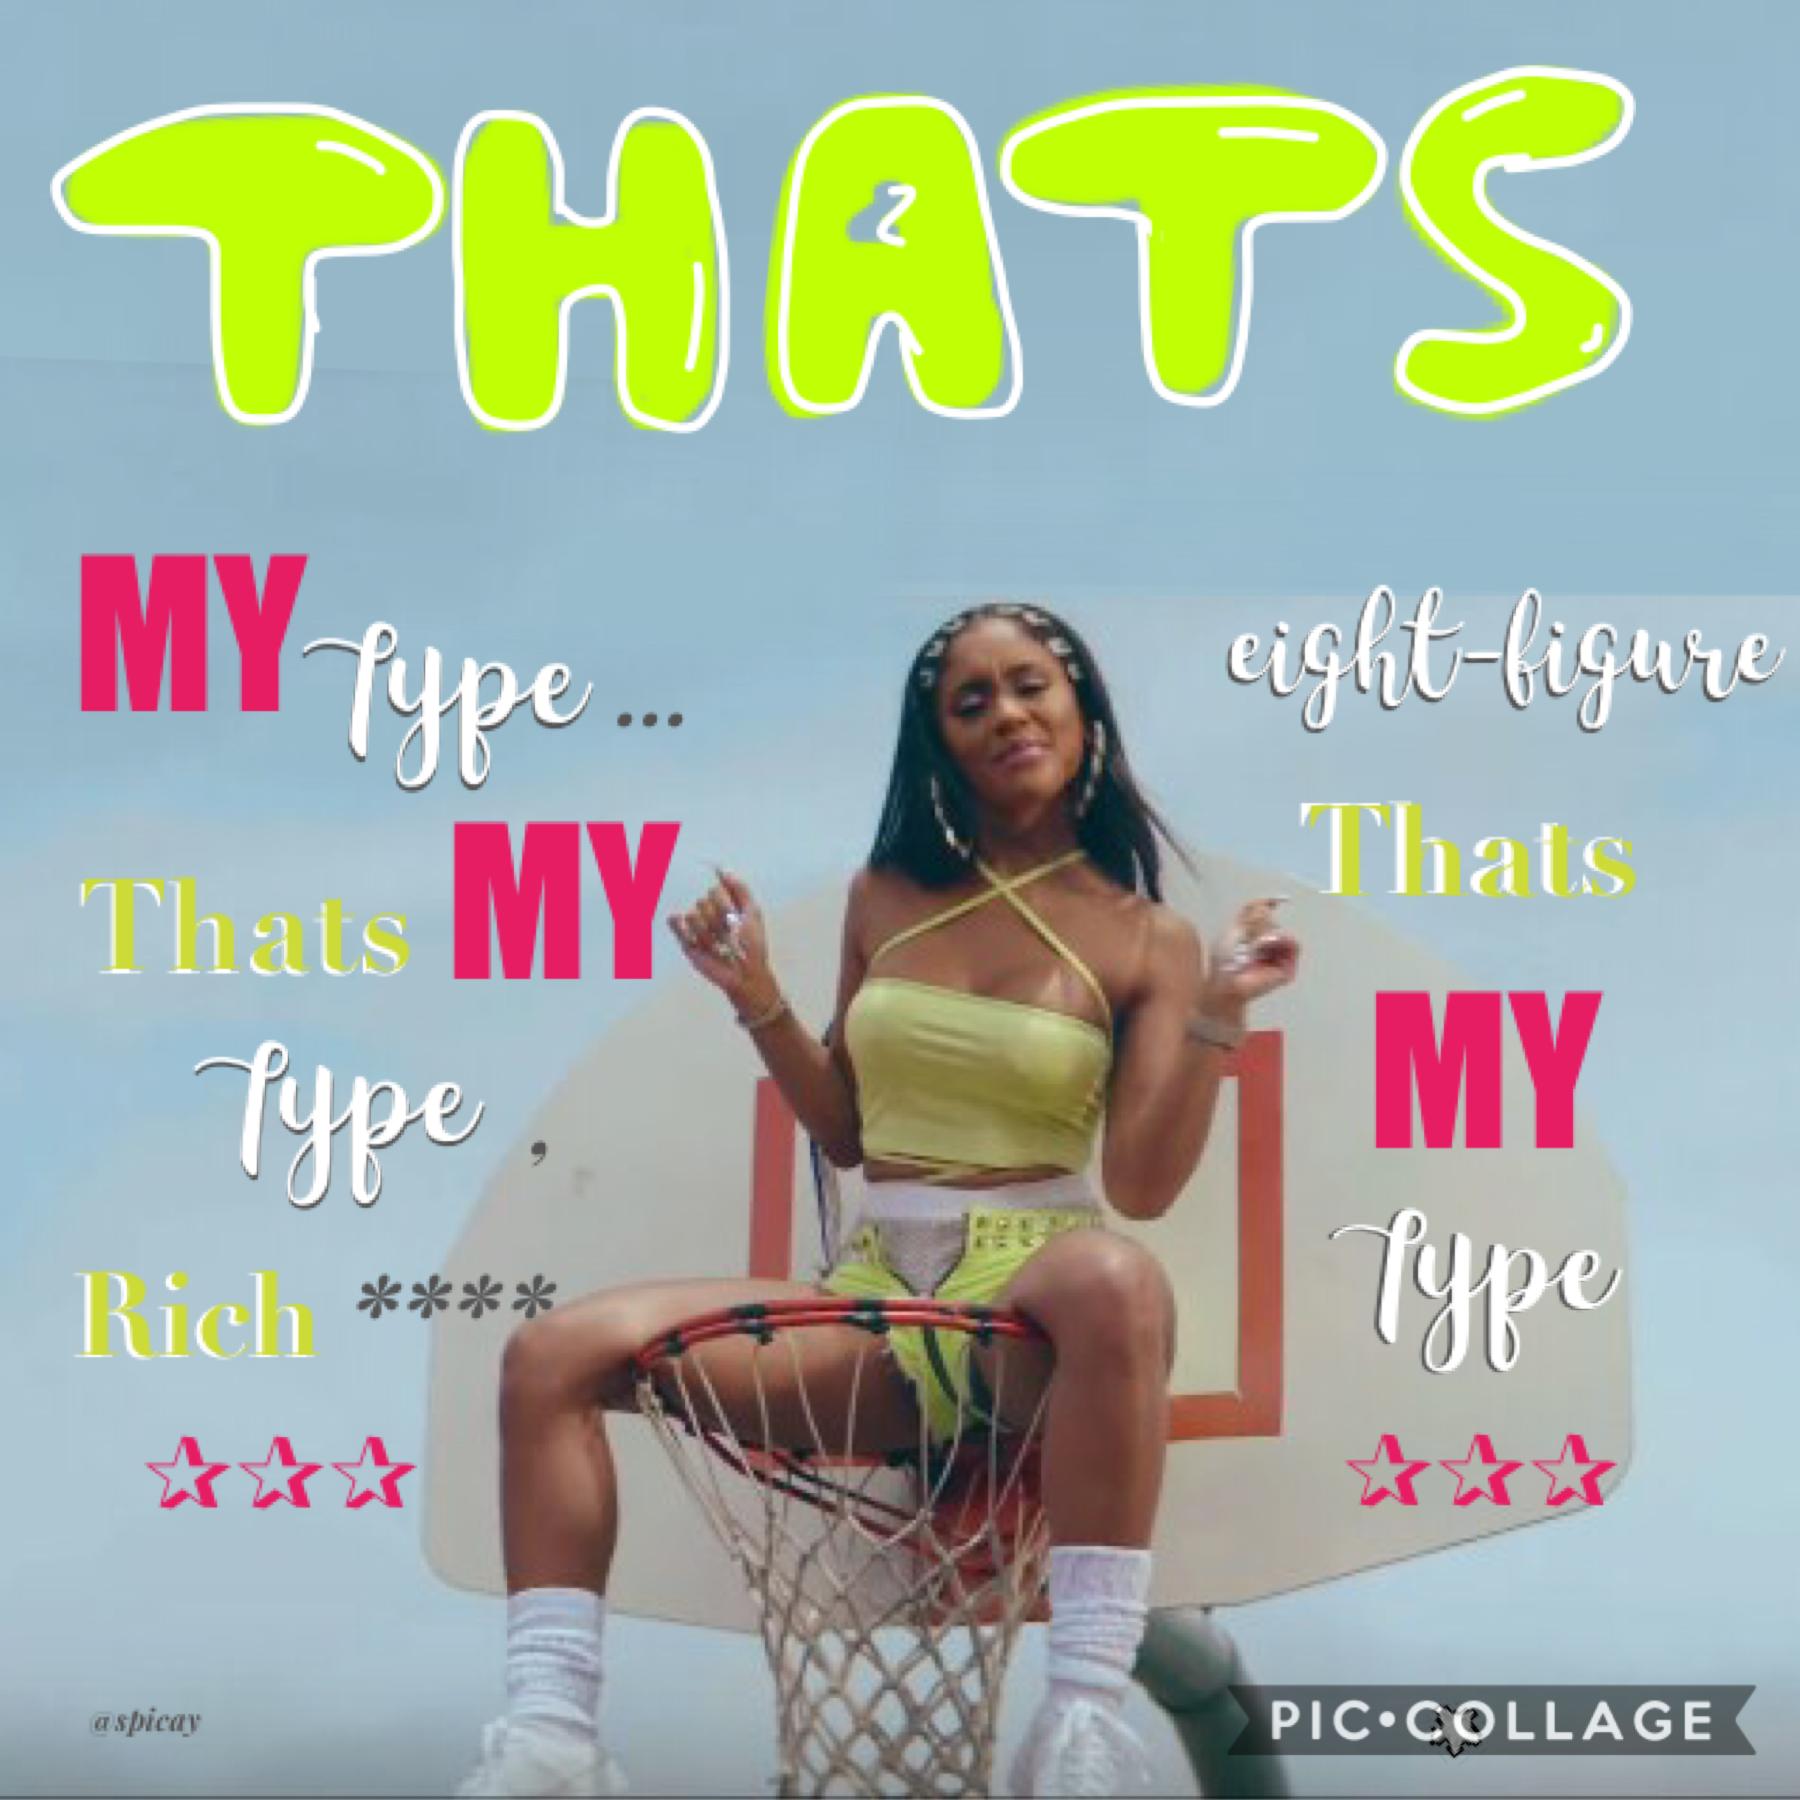 Saweetie🧊Tap
the 1 & only Icy grl
This took me like a month bc i was stressing to much on the words😂
💡Fun fact: it’s really hard to get things out of the PicCollage watermark. I have a star stuck there.